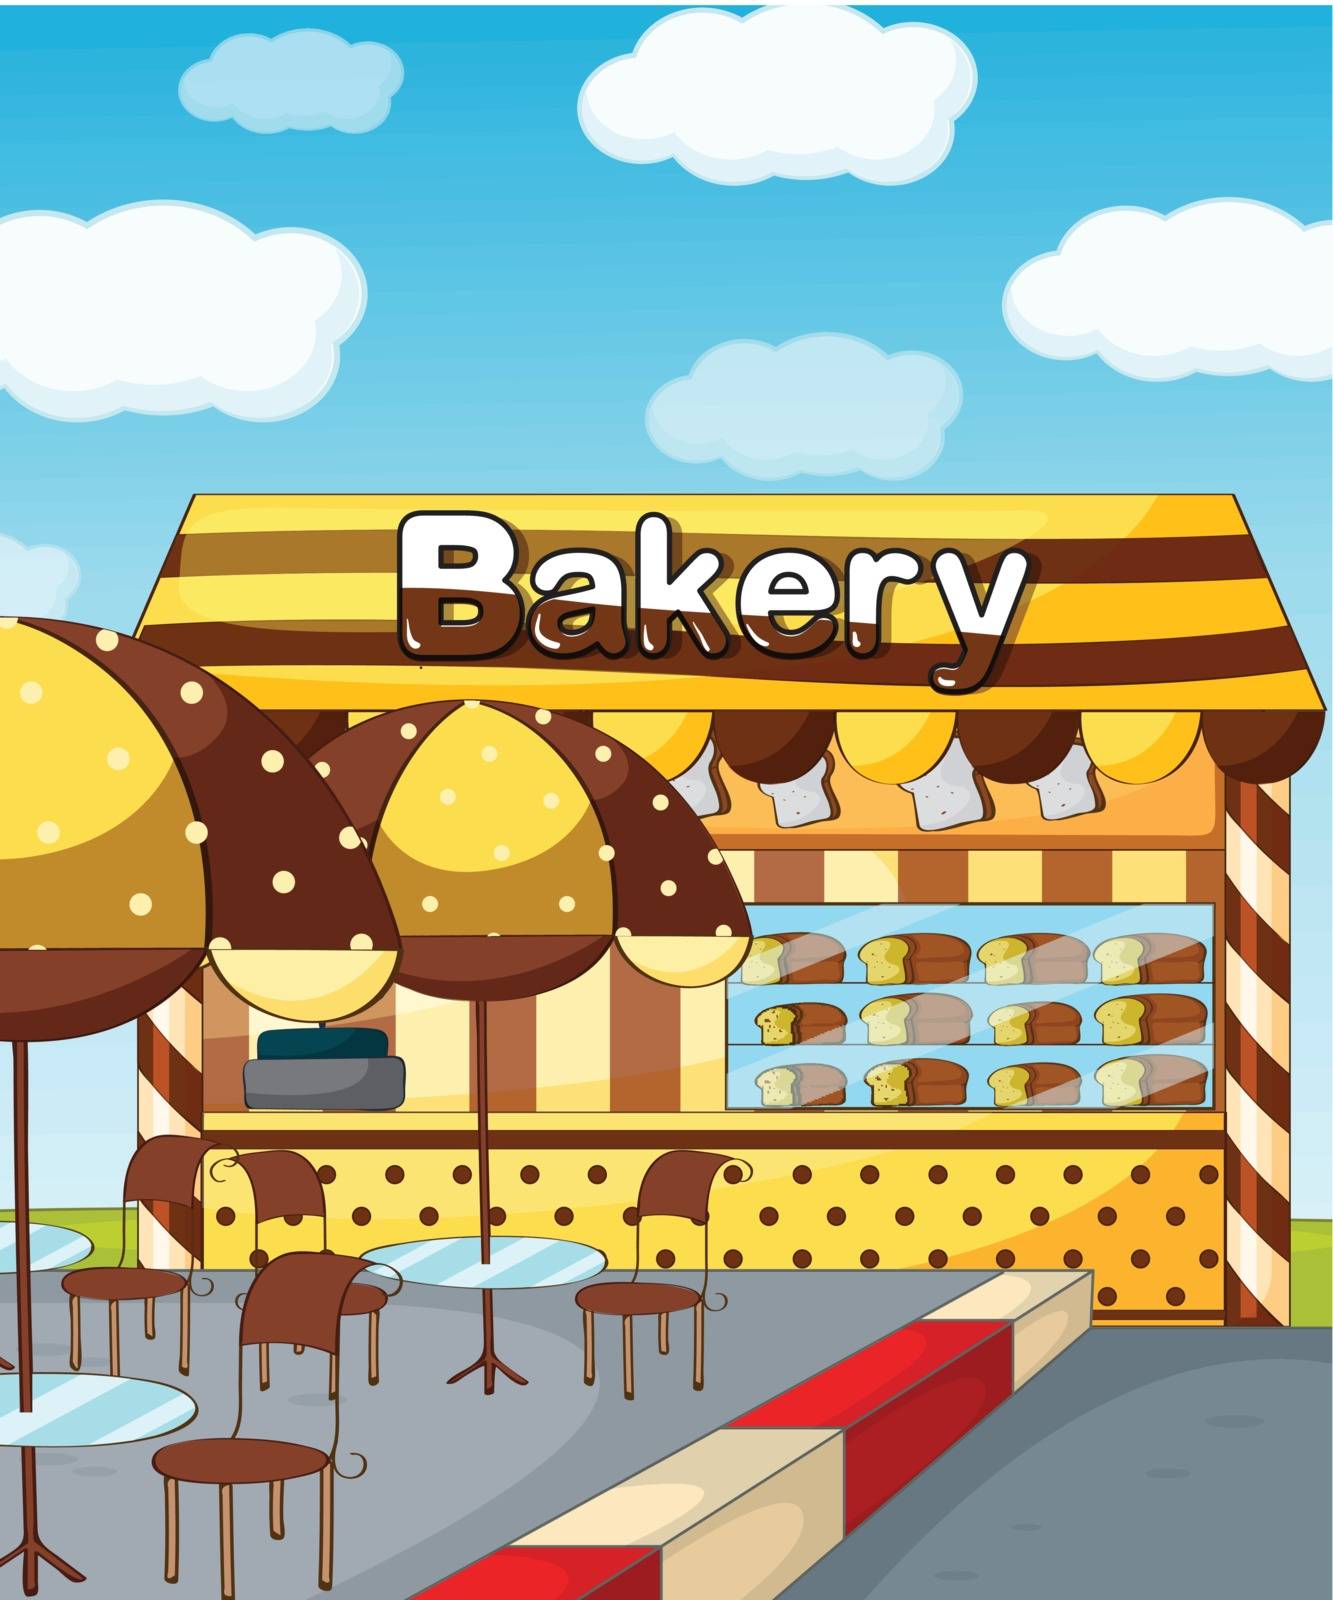 Illustration of a bakery store under a clear blue sky